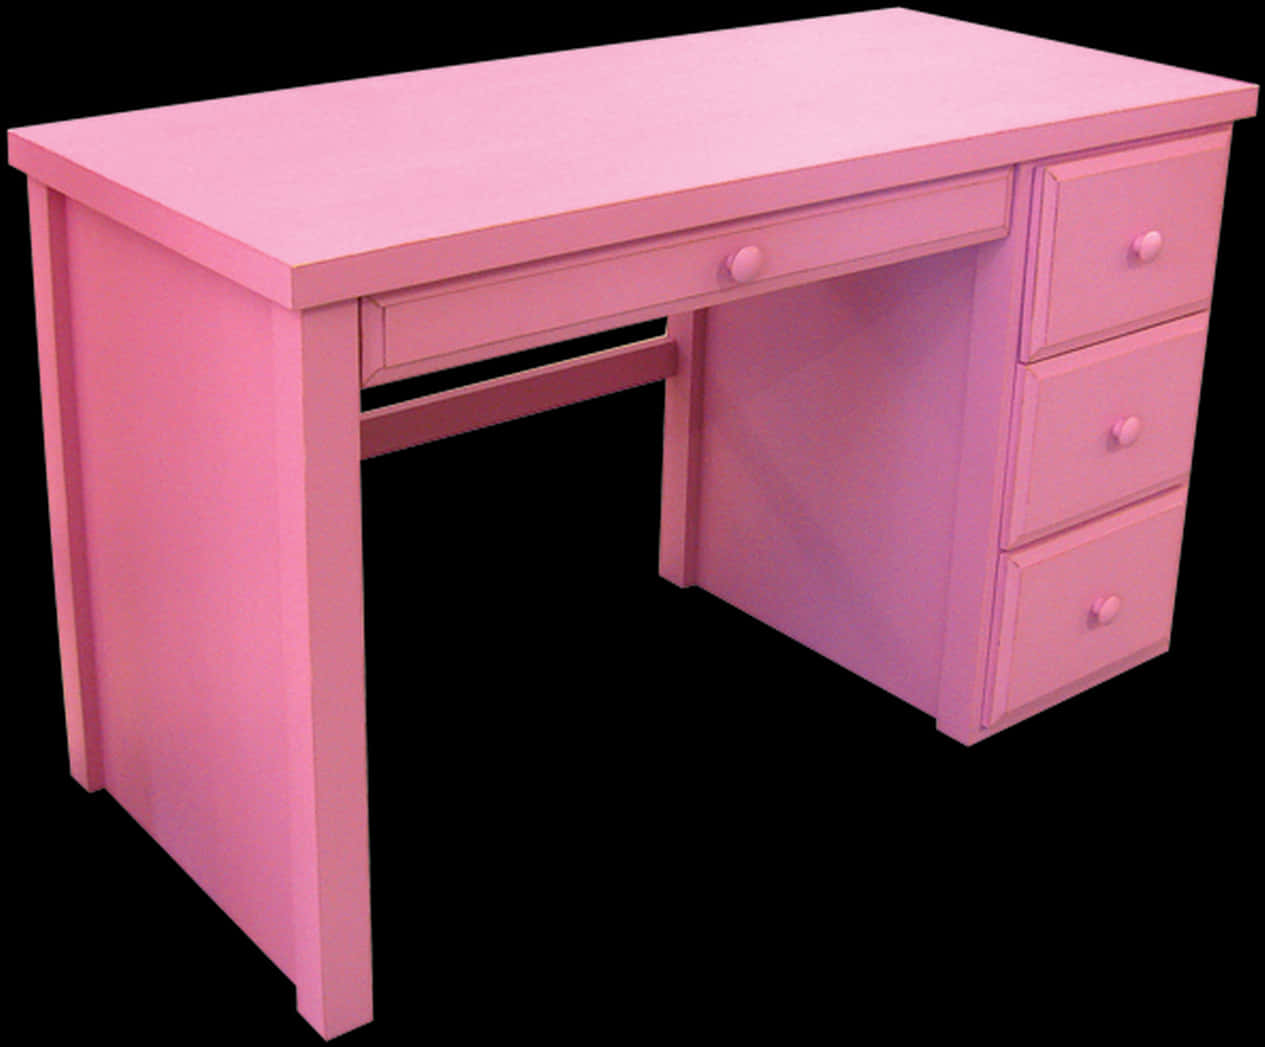 Pink Wooden Deskwith Drawers.jpg PNG image